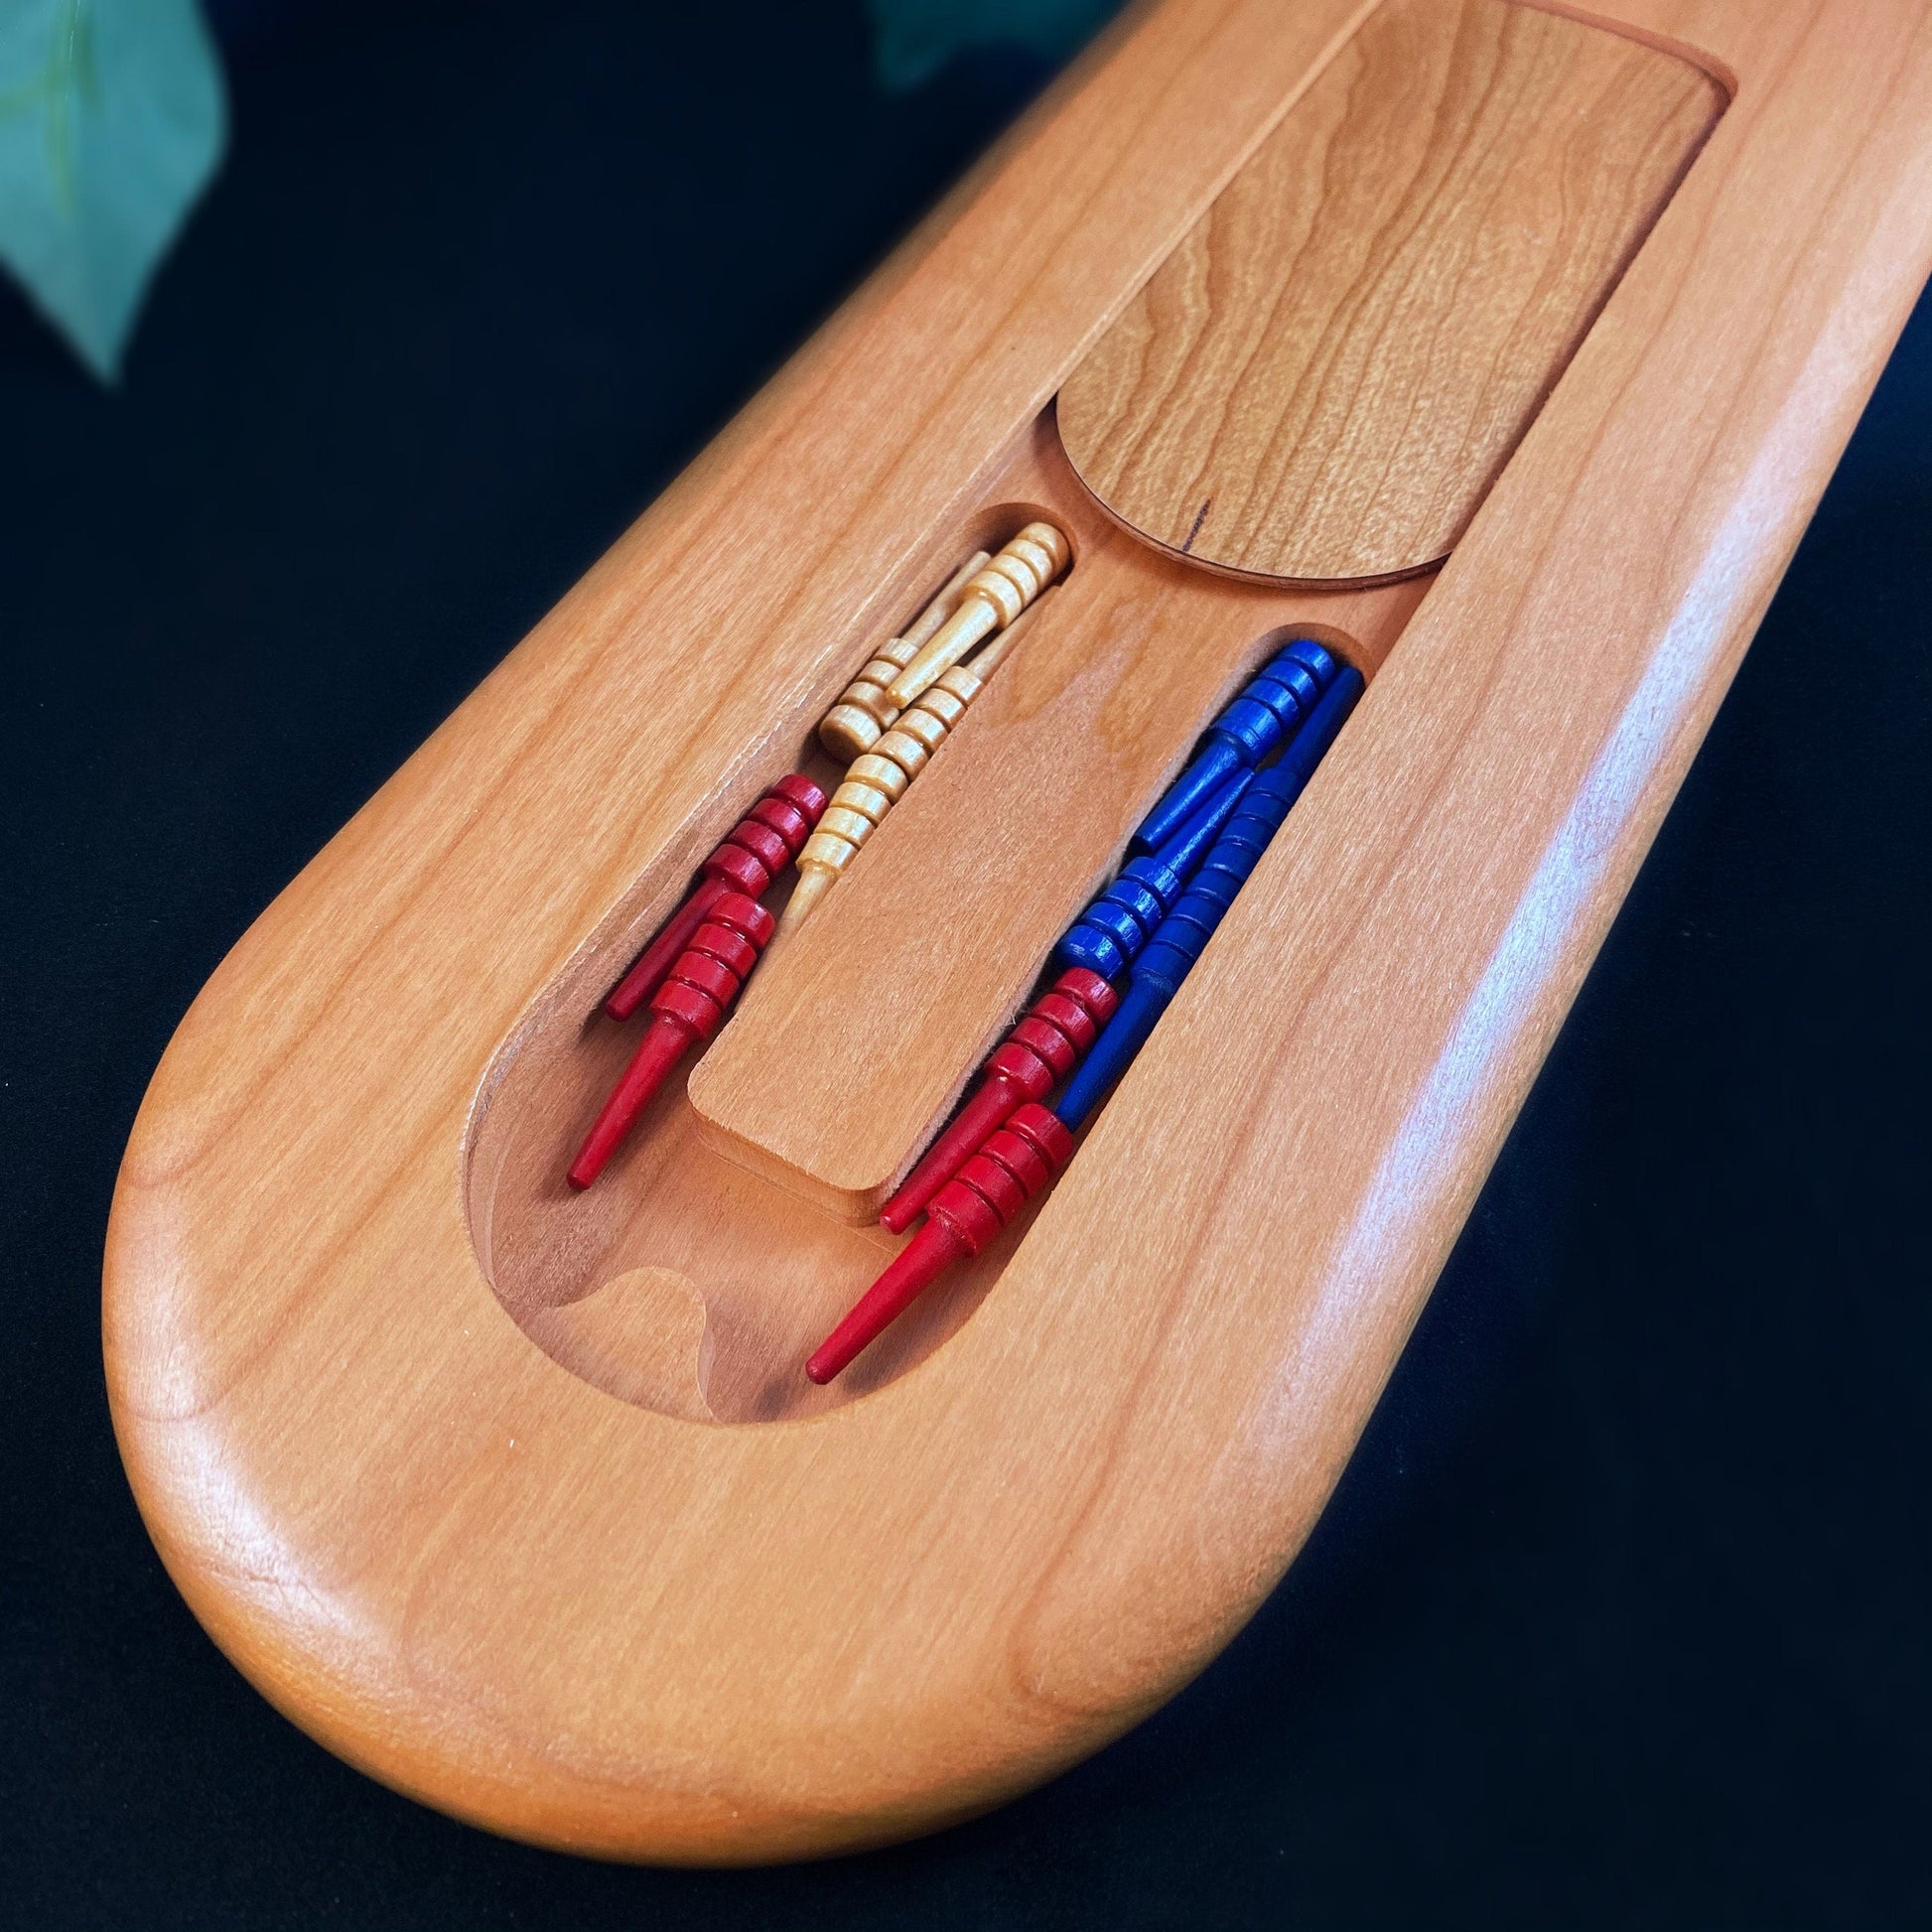 Handmade Wooden Cribbage Board with Pegs - Cherry